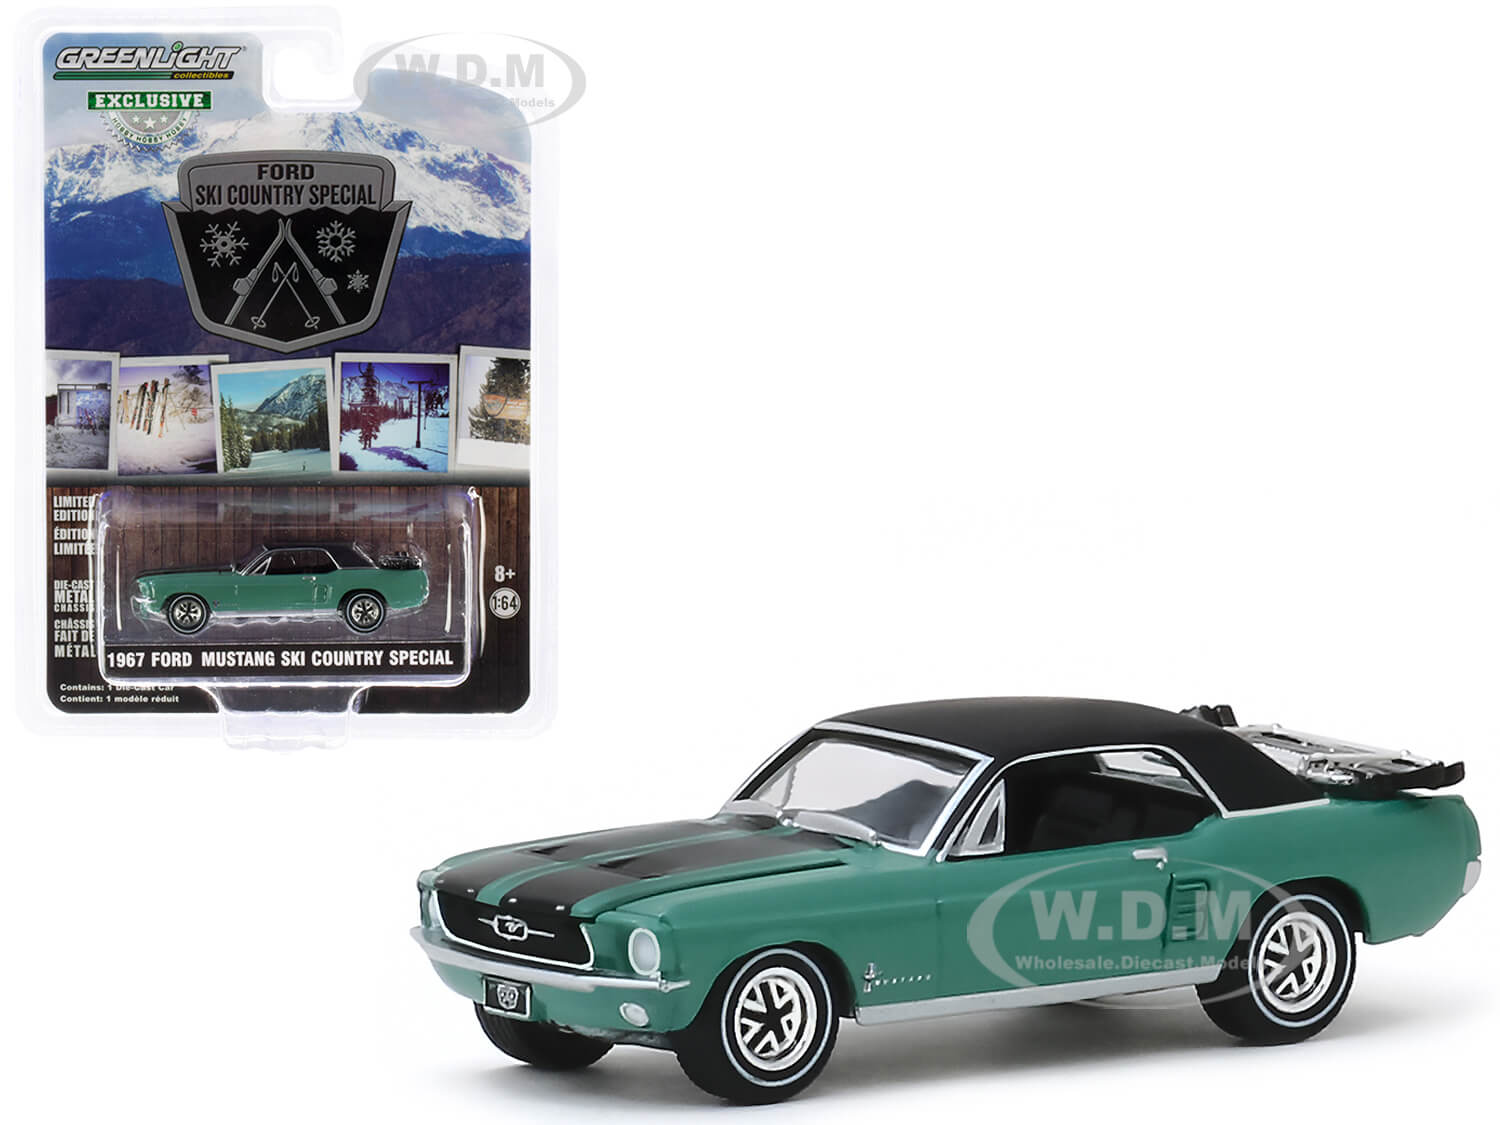 1967 Ford Mustang Coupe Loveland Green Metallic with Black Stripes and Black Top and a Pair of Skis "Ski Country Special" "Hobby Exclusive" 1/64 Diec